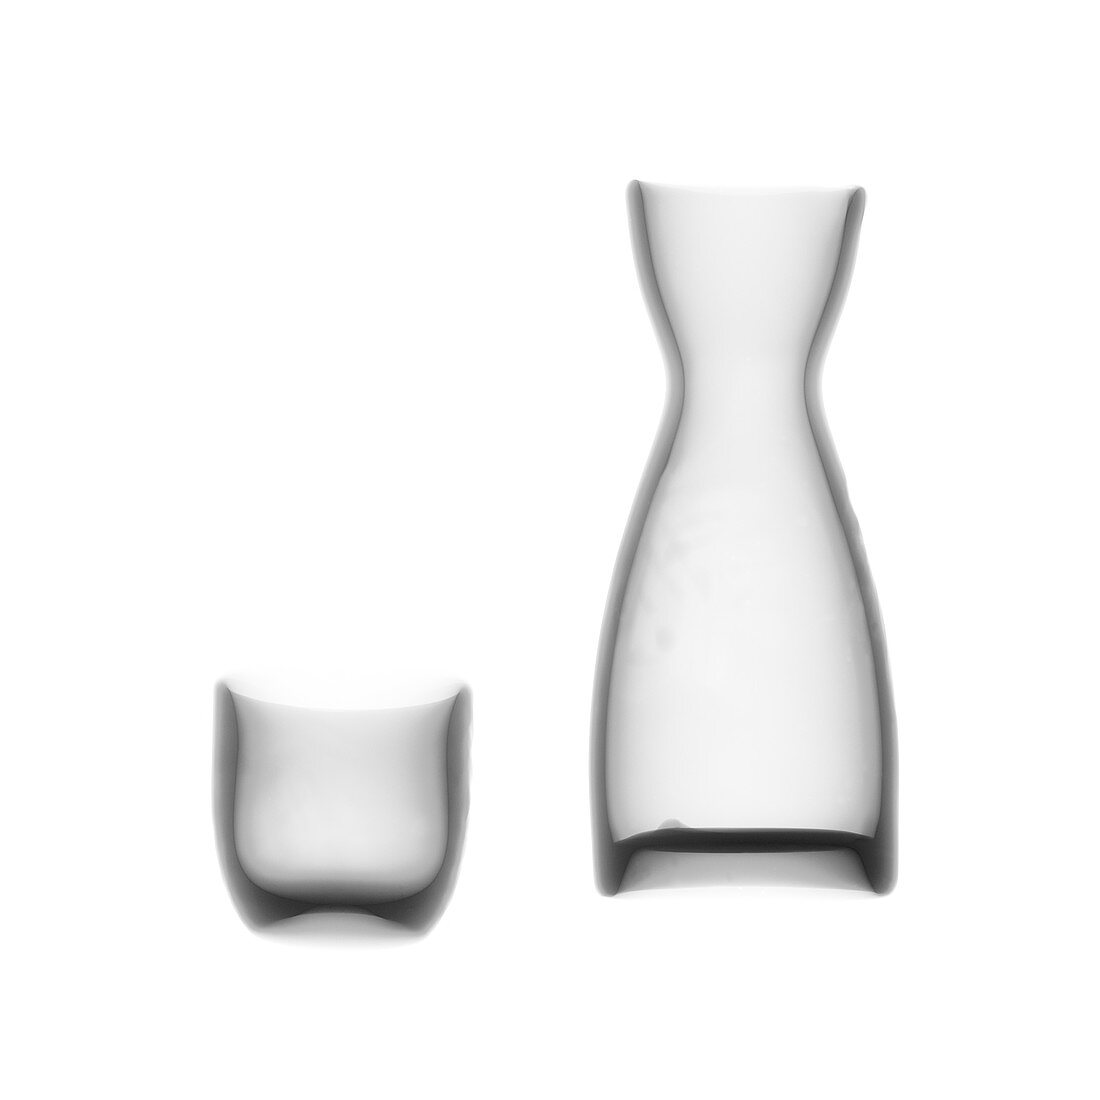 Glass carafe and tumbler, X-ray